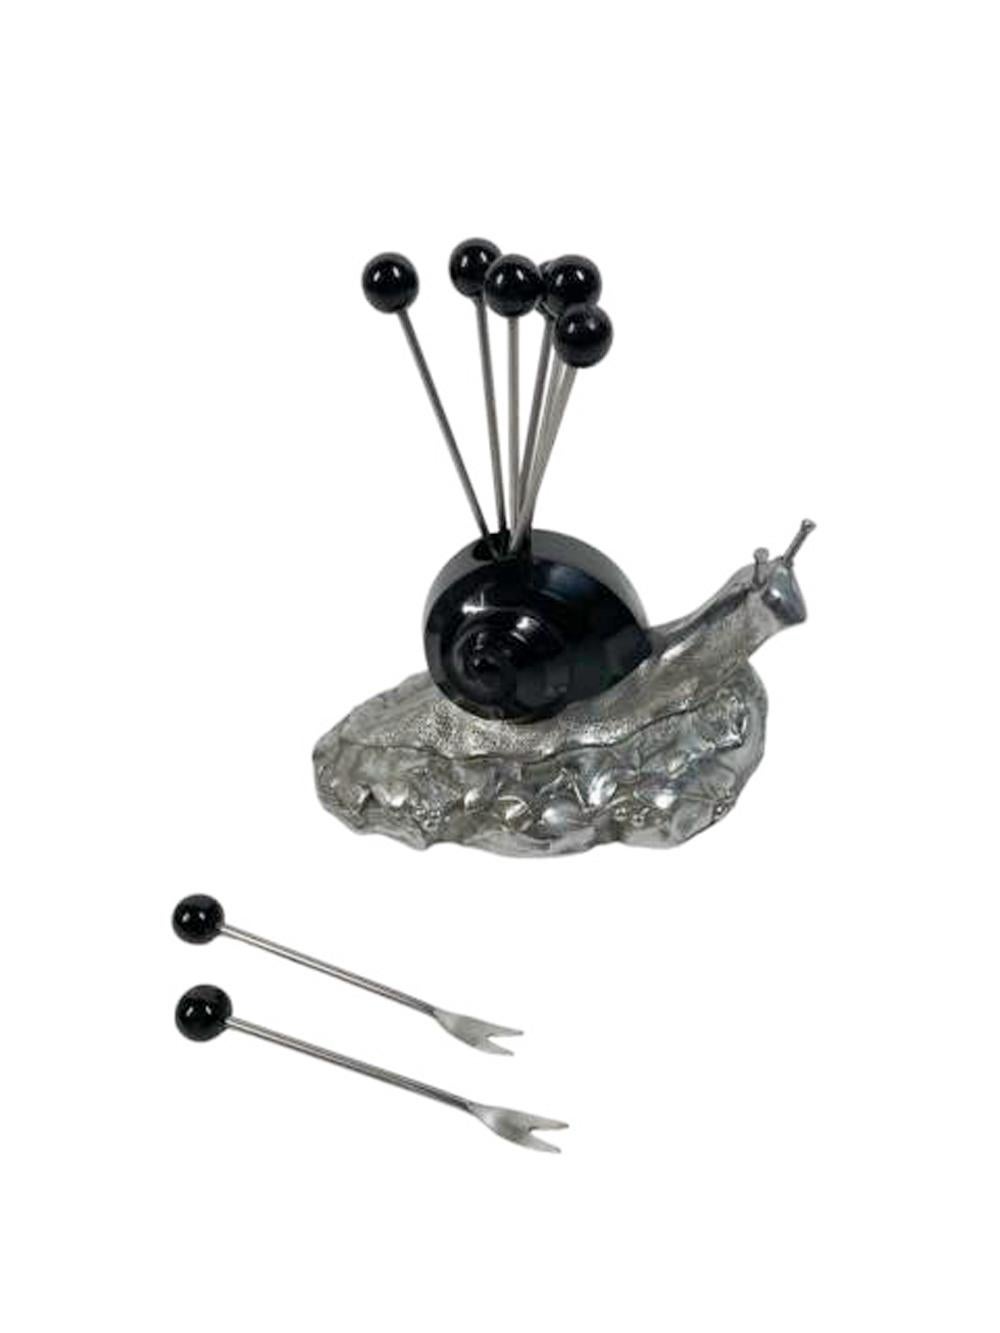 20th Century Art Deco Chrome and Black Bakelite Ball-Top Cocktail Picks and Snail-Form Stand For Sale